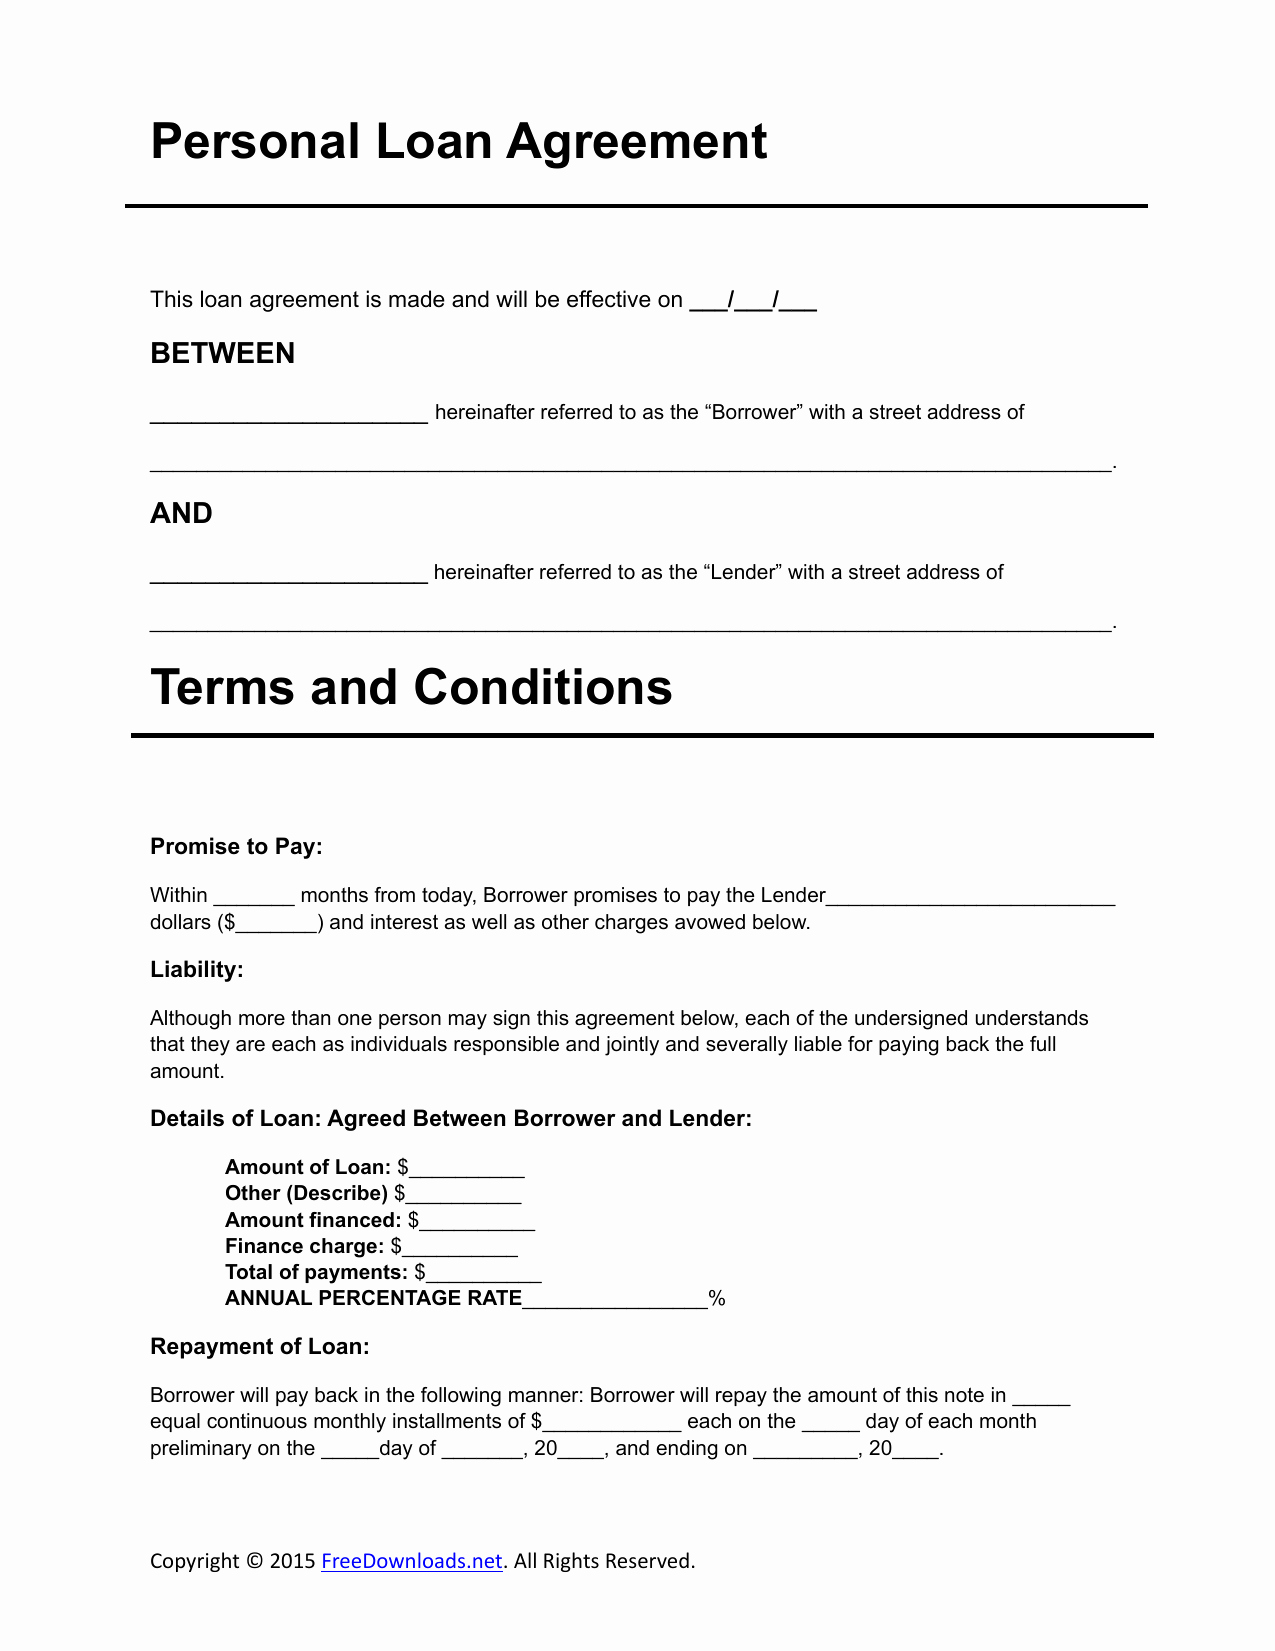 Simple Loan Application form Template Lovely Download Personal Loan Agreement Template Pdf